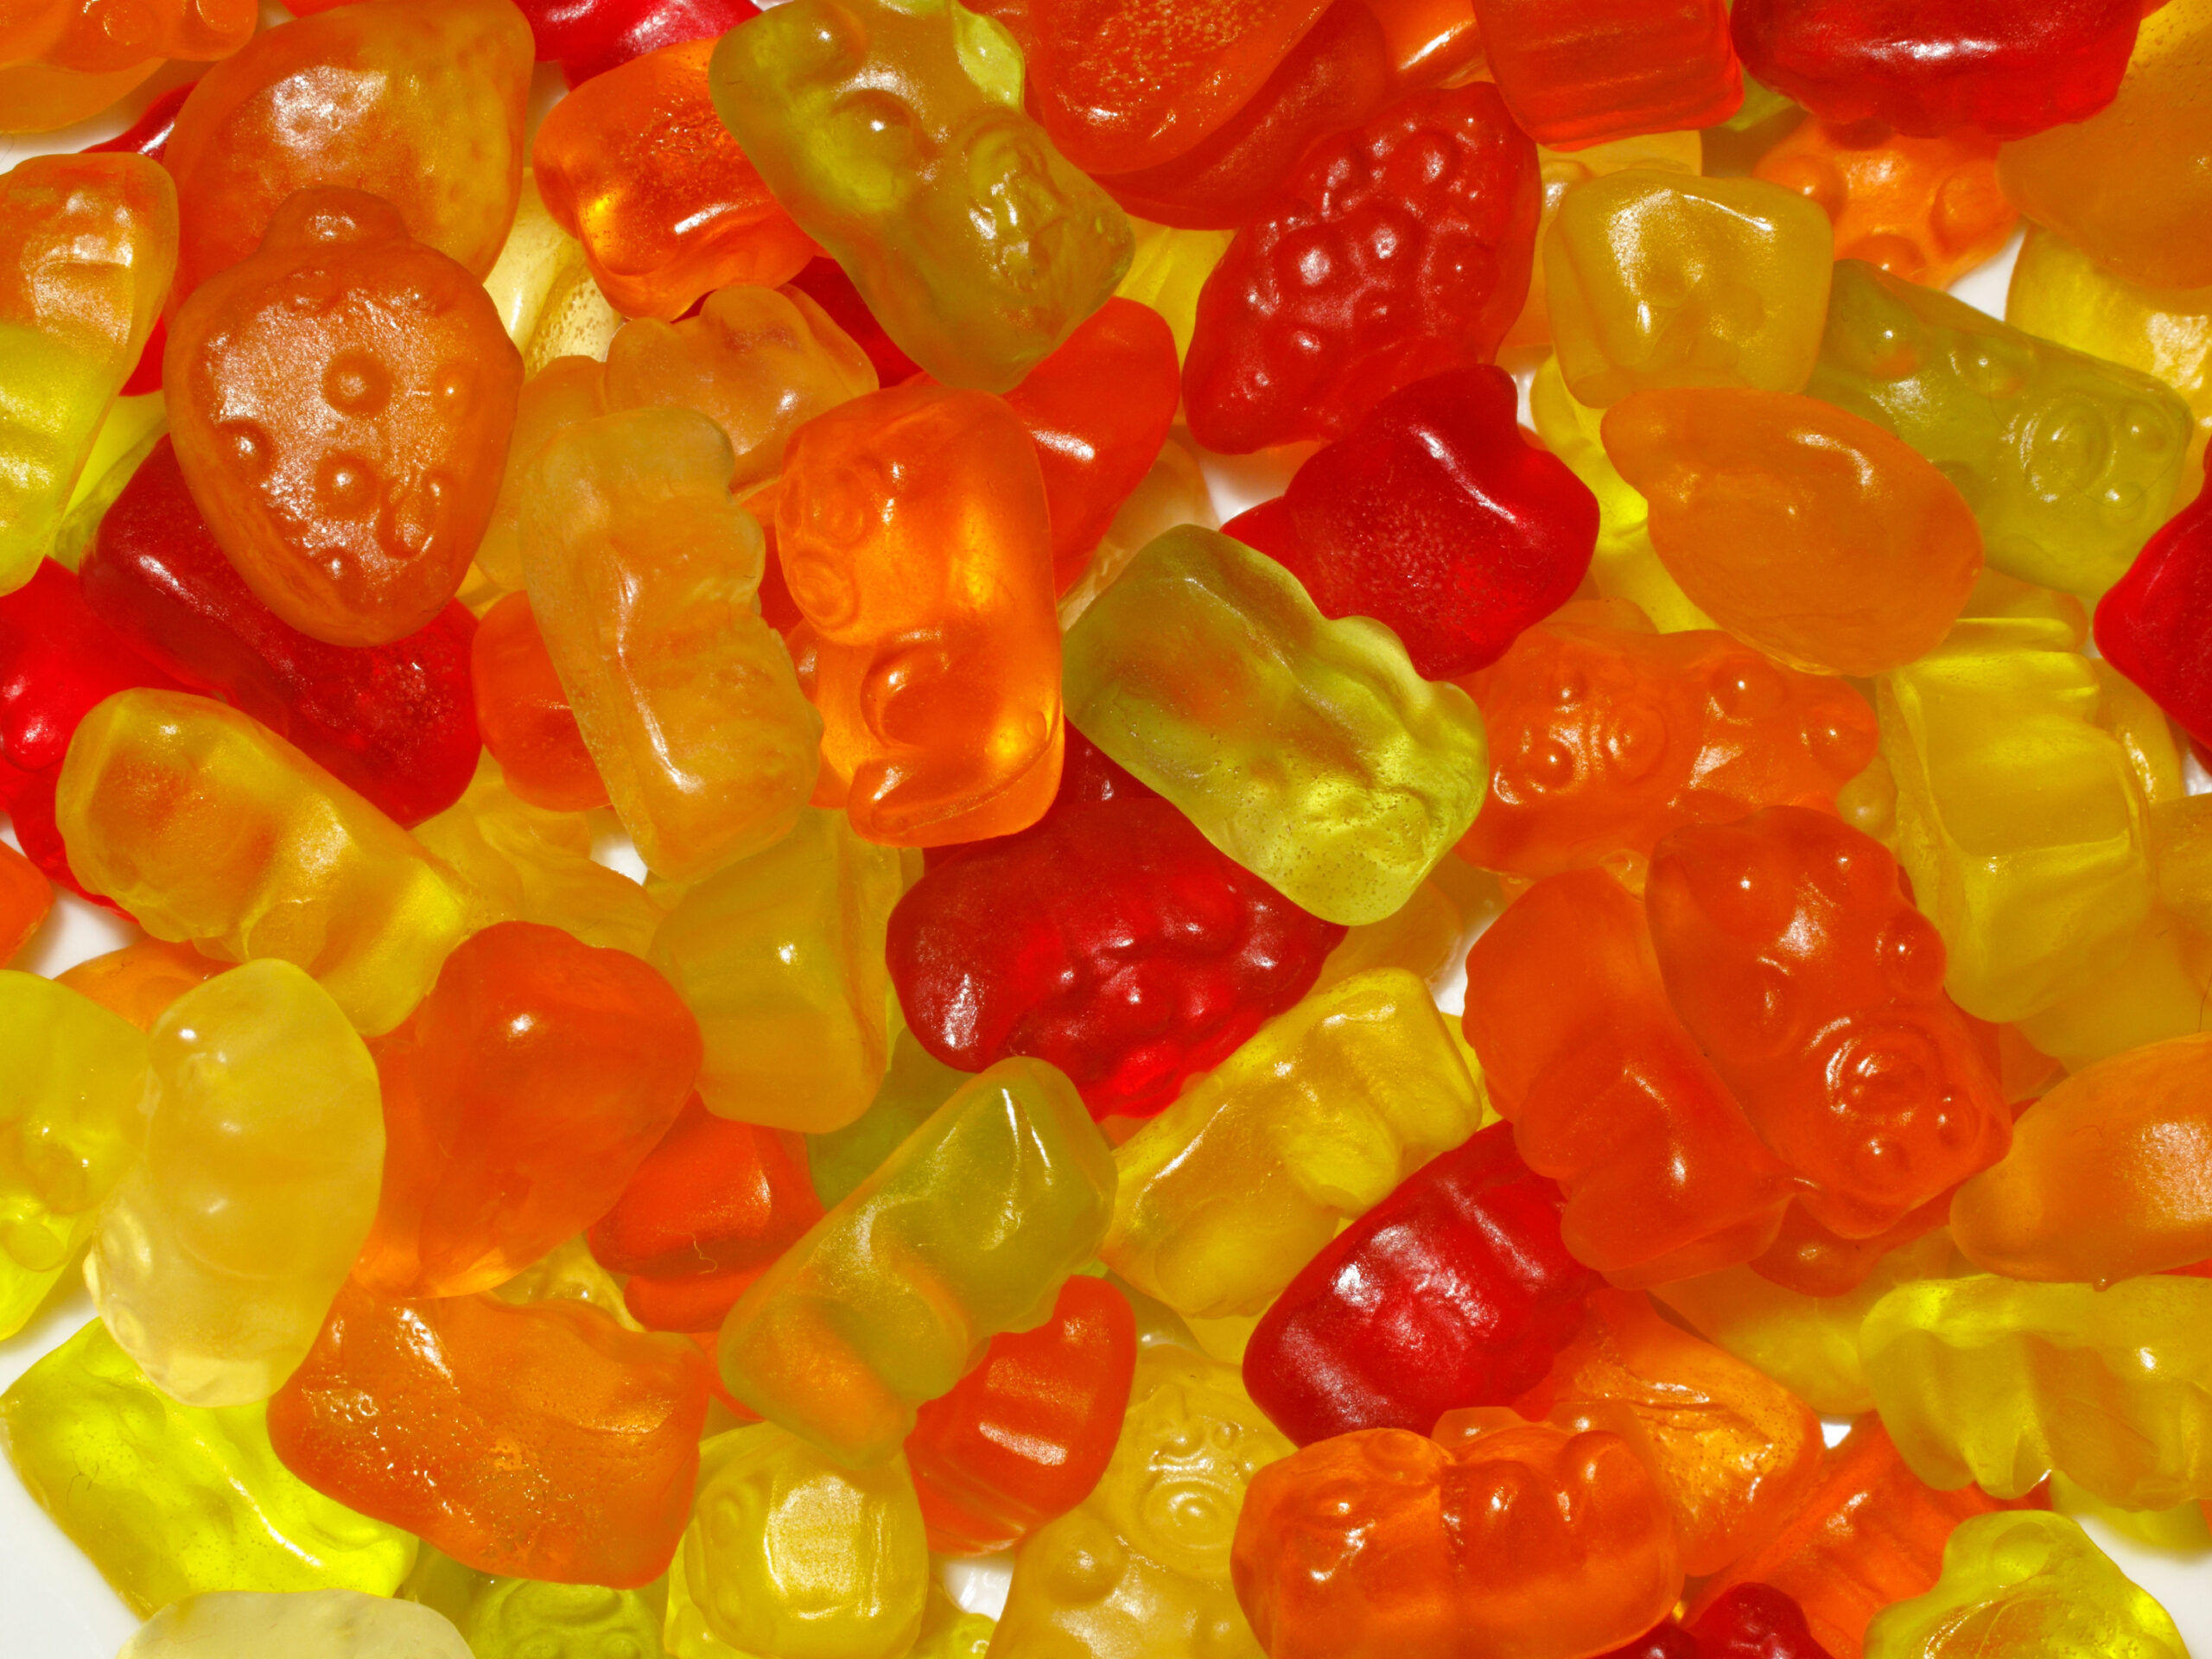 Haribo Rewards Man Who Found Its $4.8 Million Check with Candy